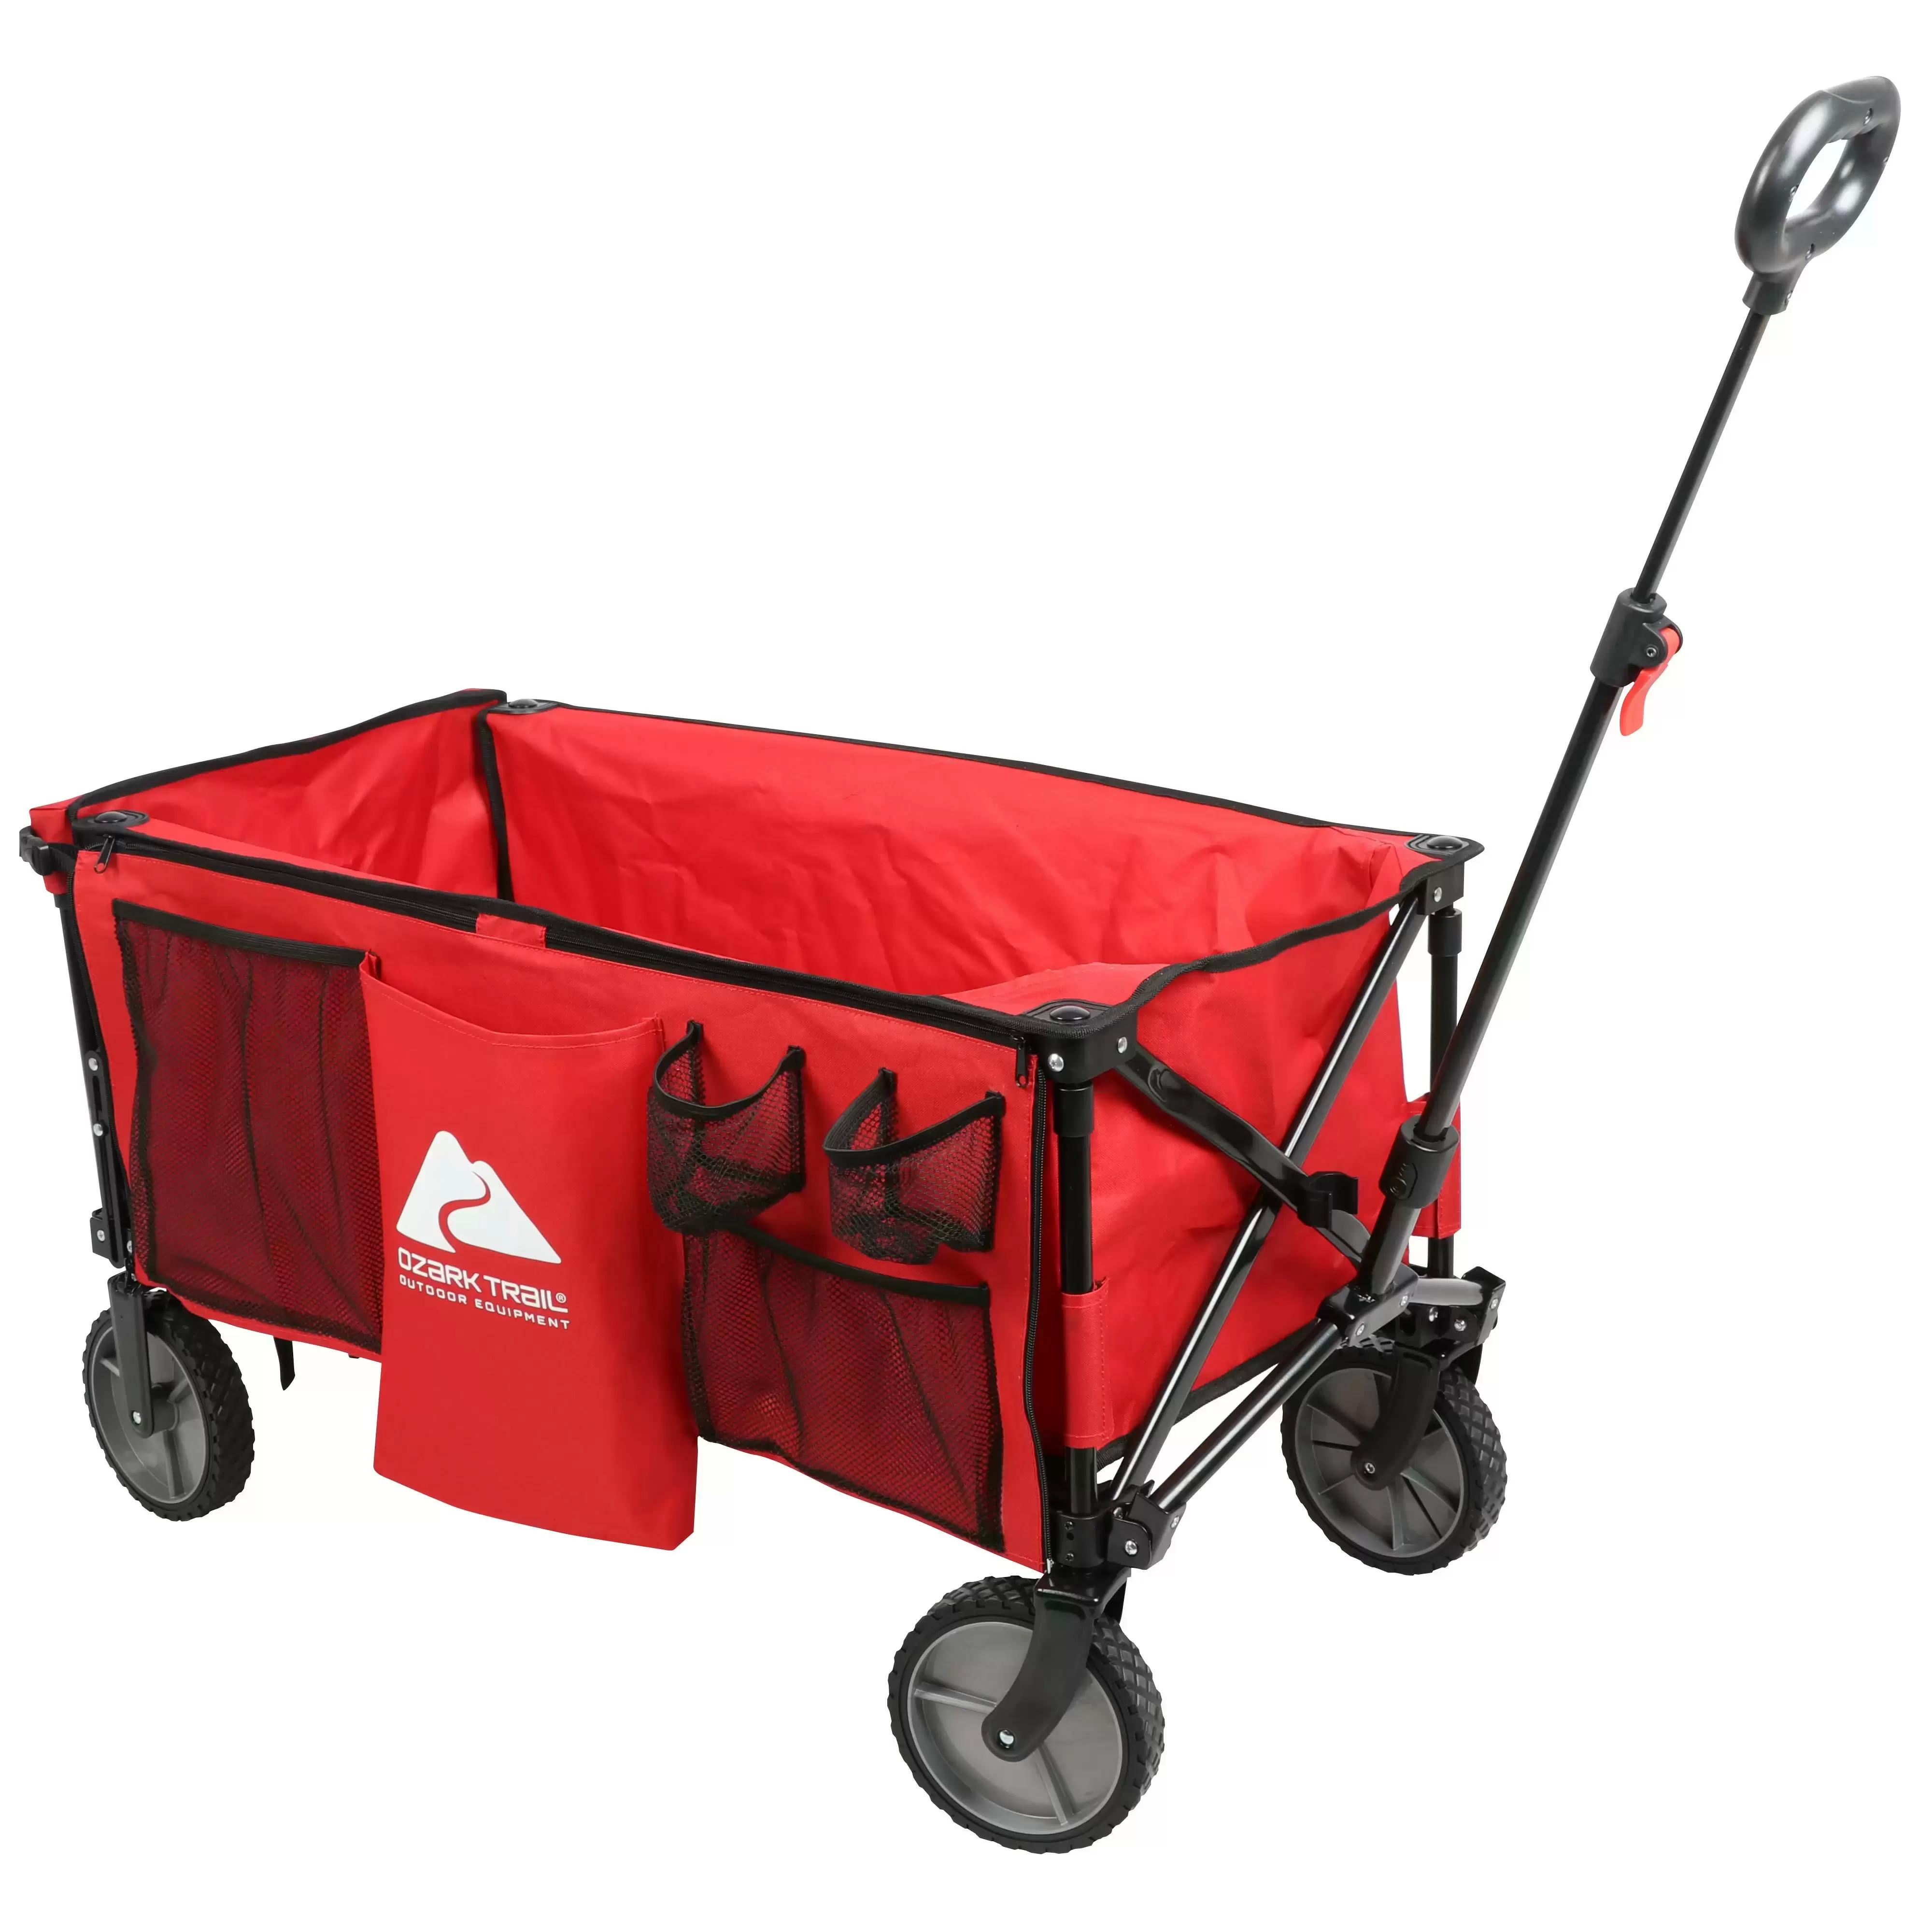 Ozark Trail Quad Folding Camp Wagon with Tailgate for $59 Shipped